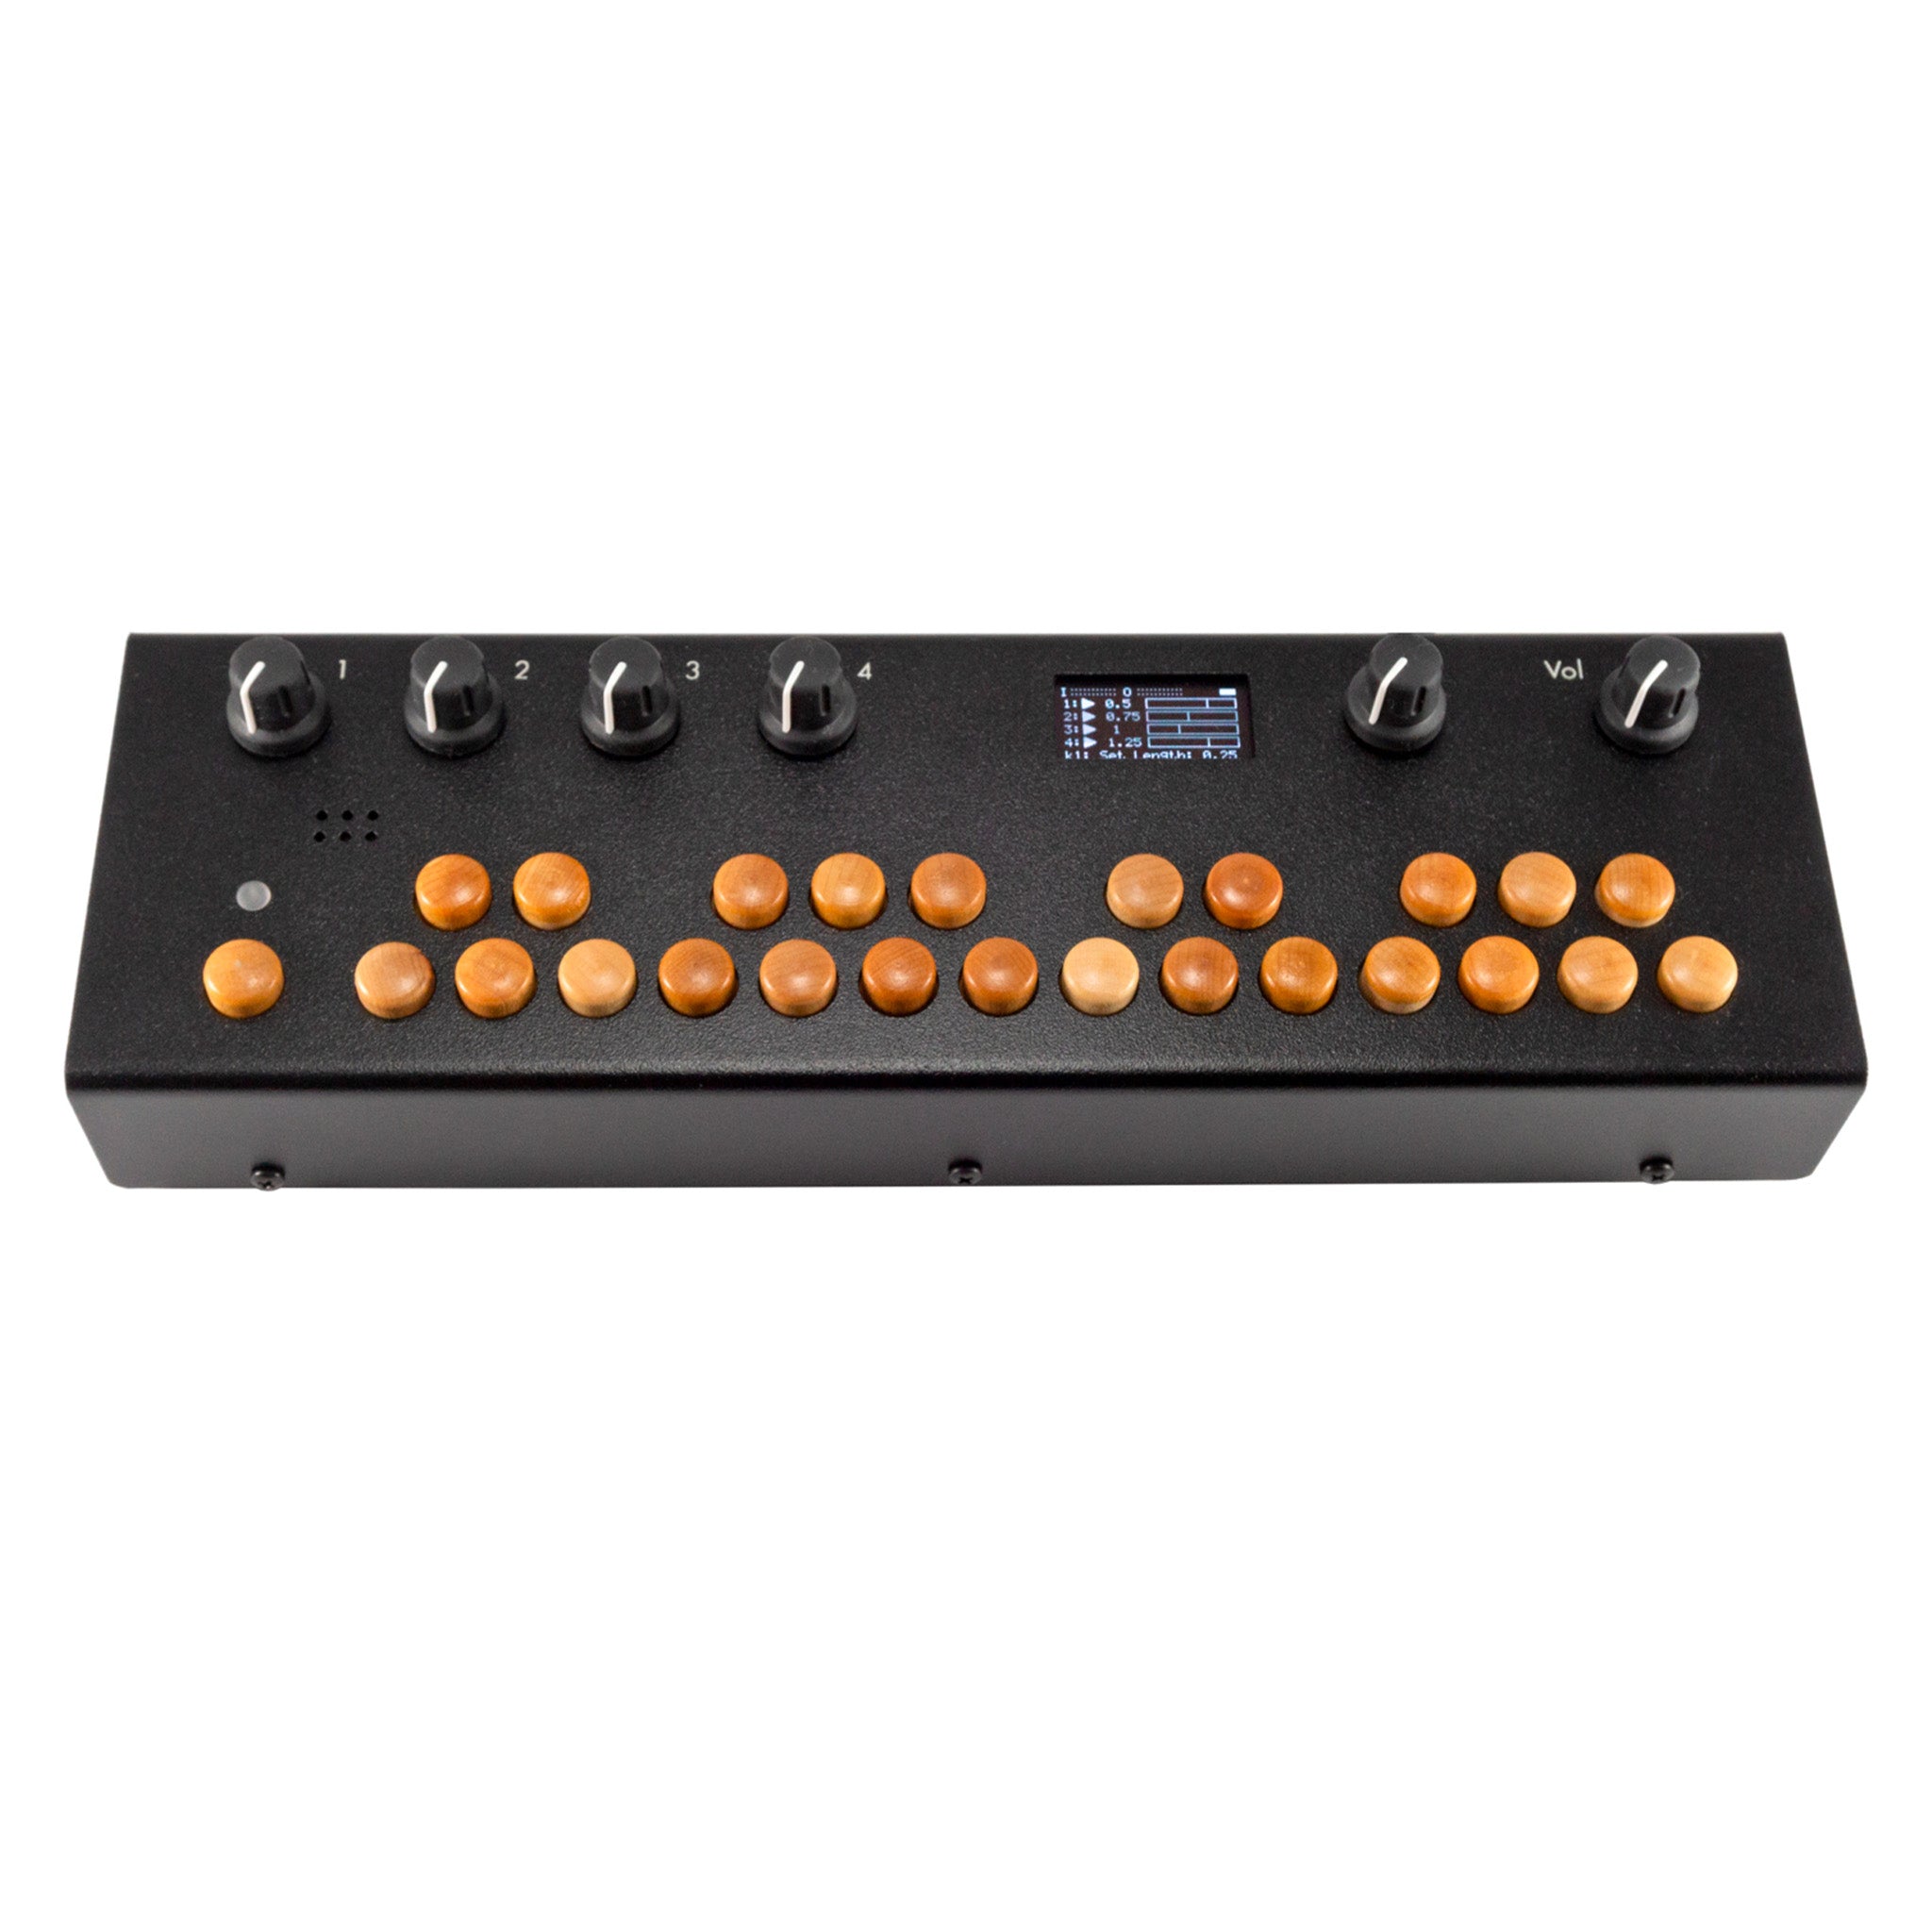 Critter u0026 Guitari Organelle S Synthesizer